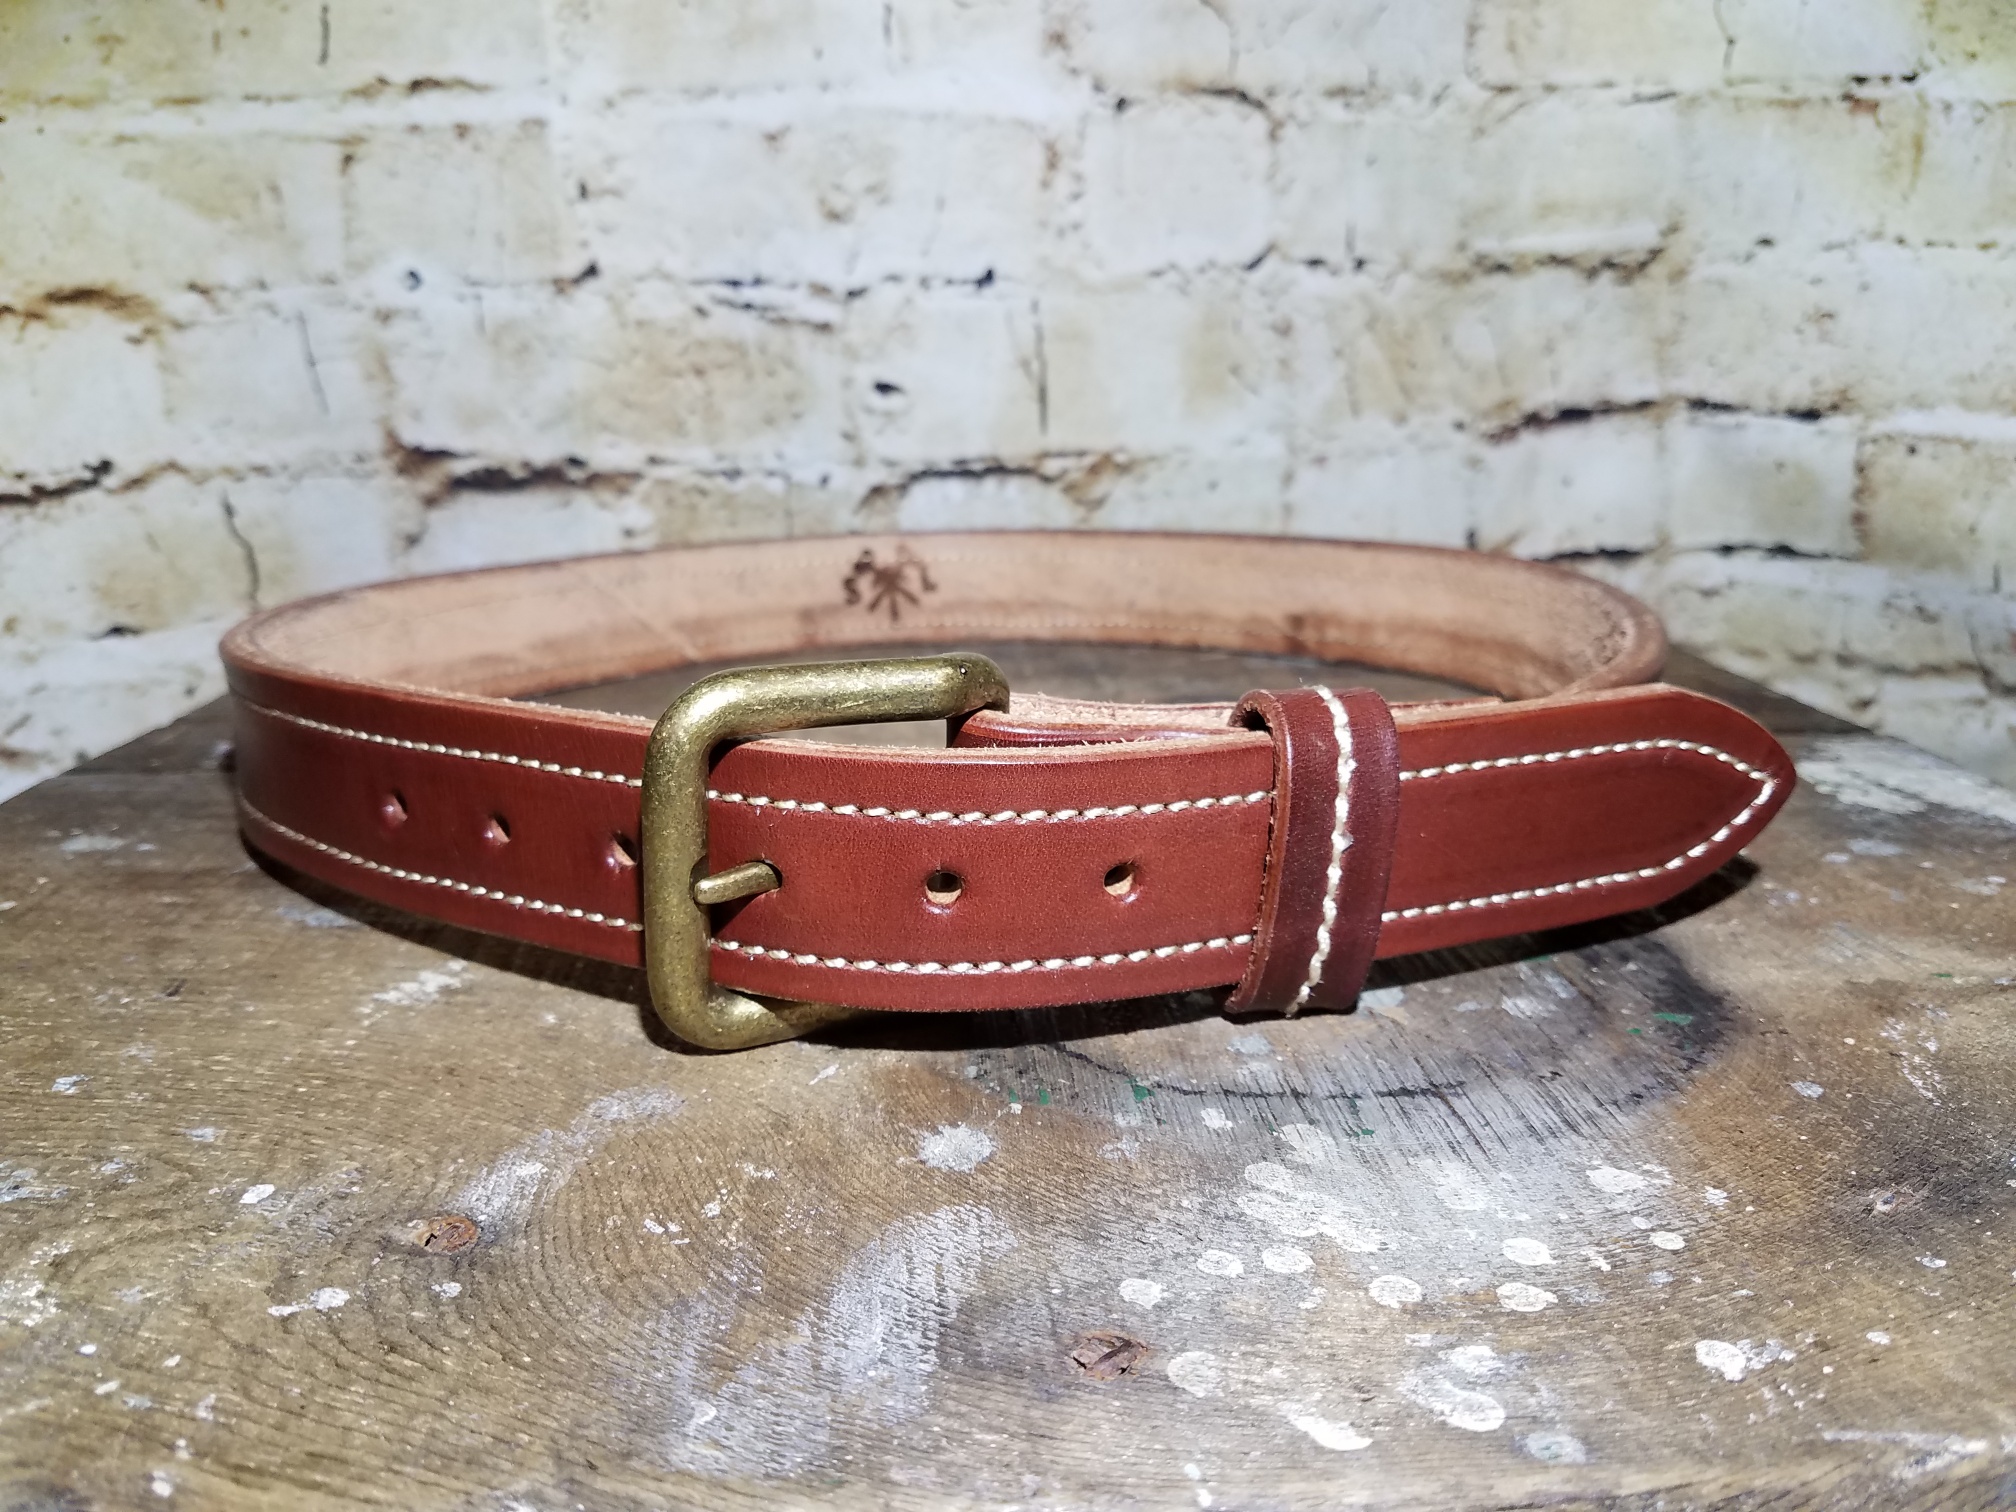 SUPER HEAVY DUTY STITCHED MENS LEATHER BELT: SIZE 38 TAN& BROWN | The ...